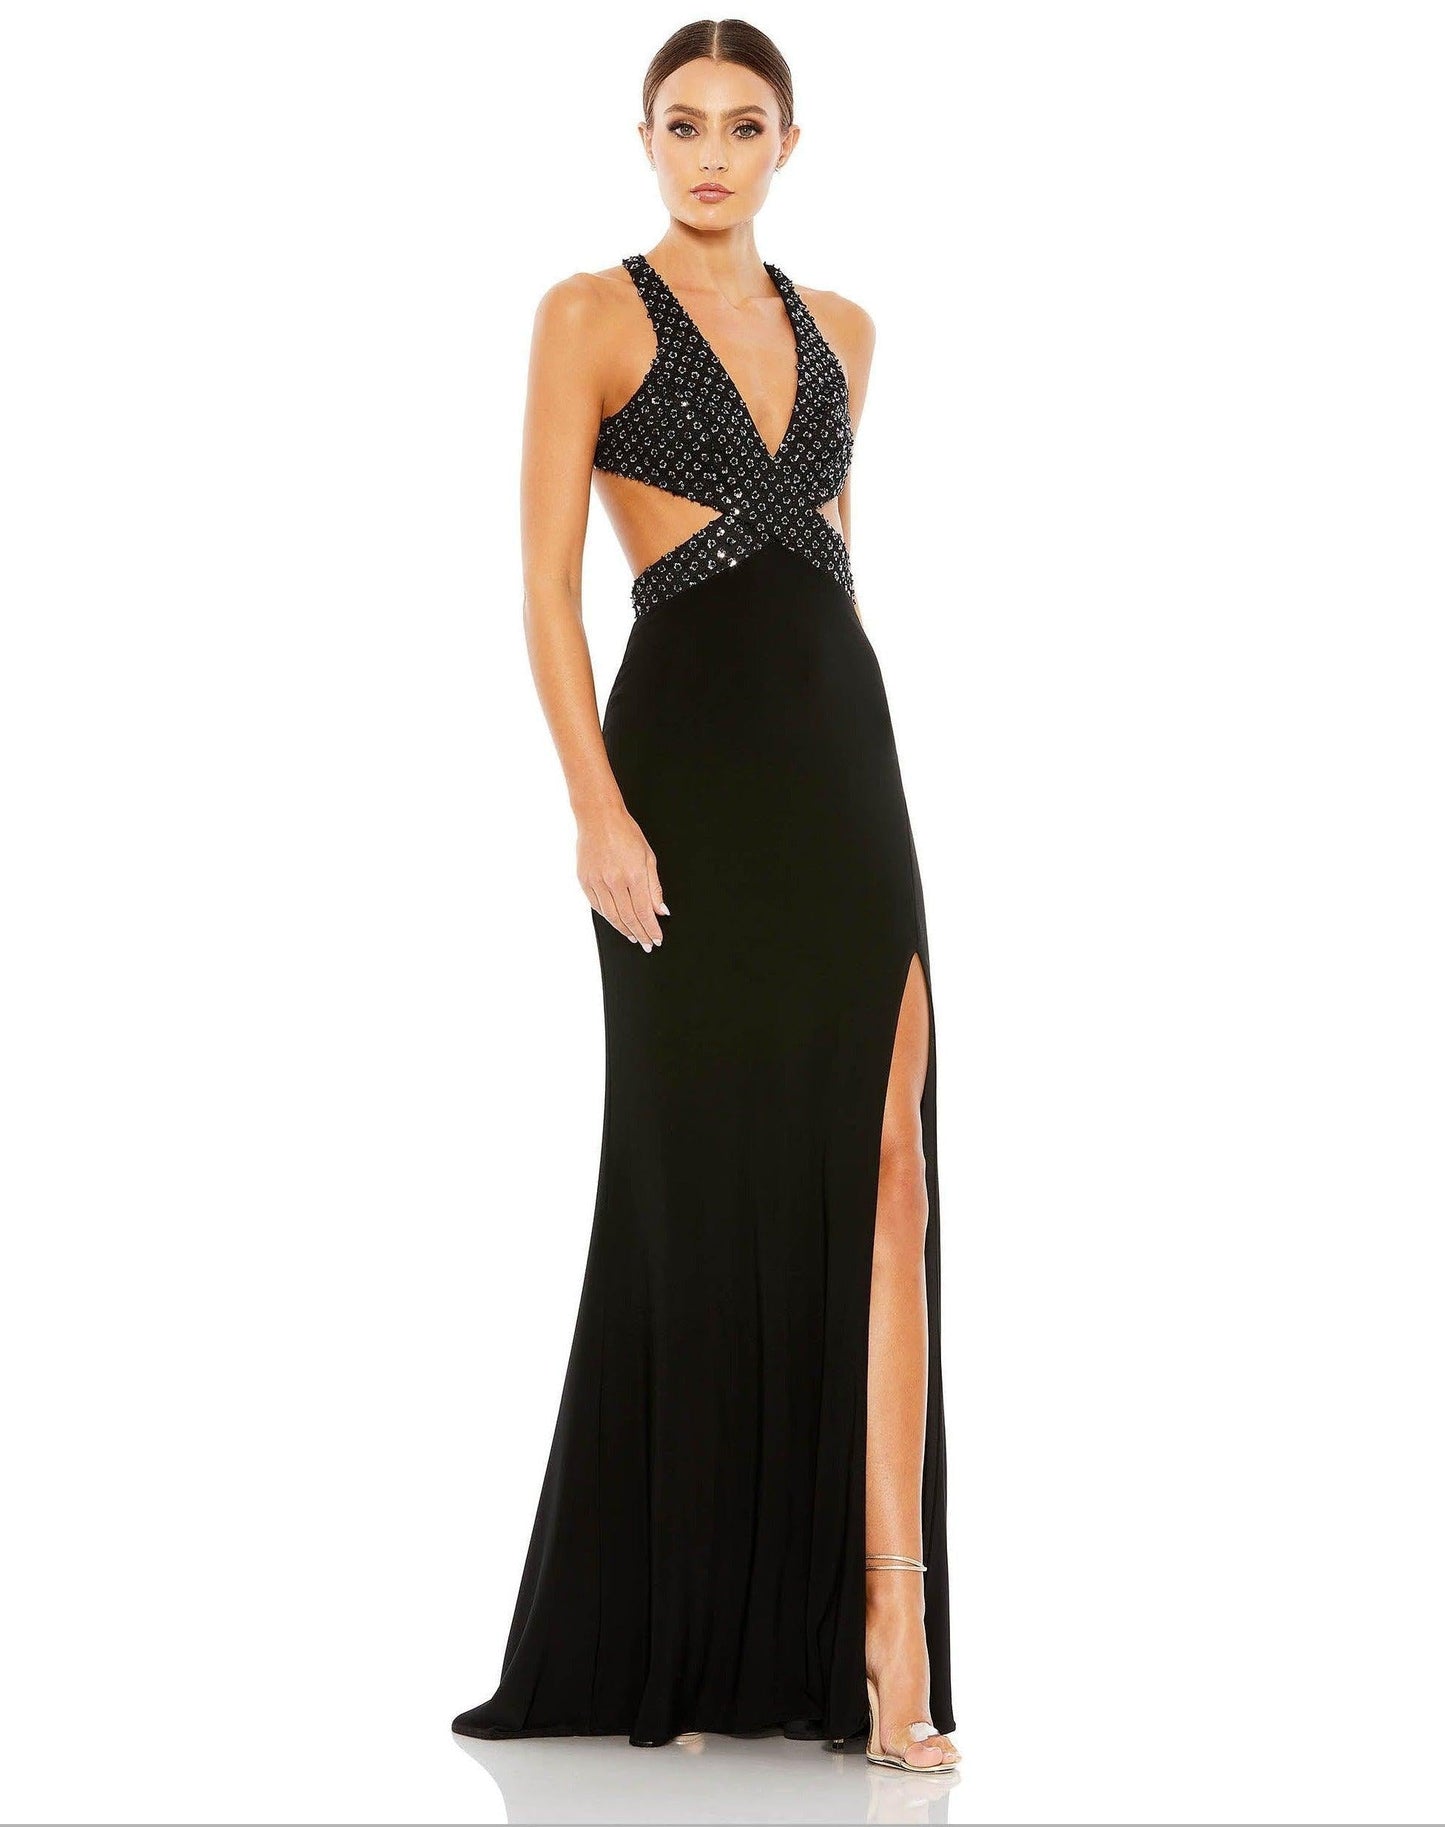 Mac Duggal Long Formal Fitted Prom Dress 68166 - The Dress Outlet